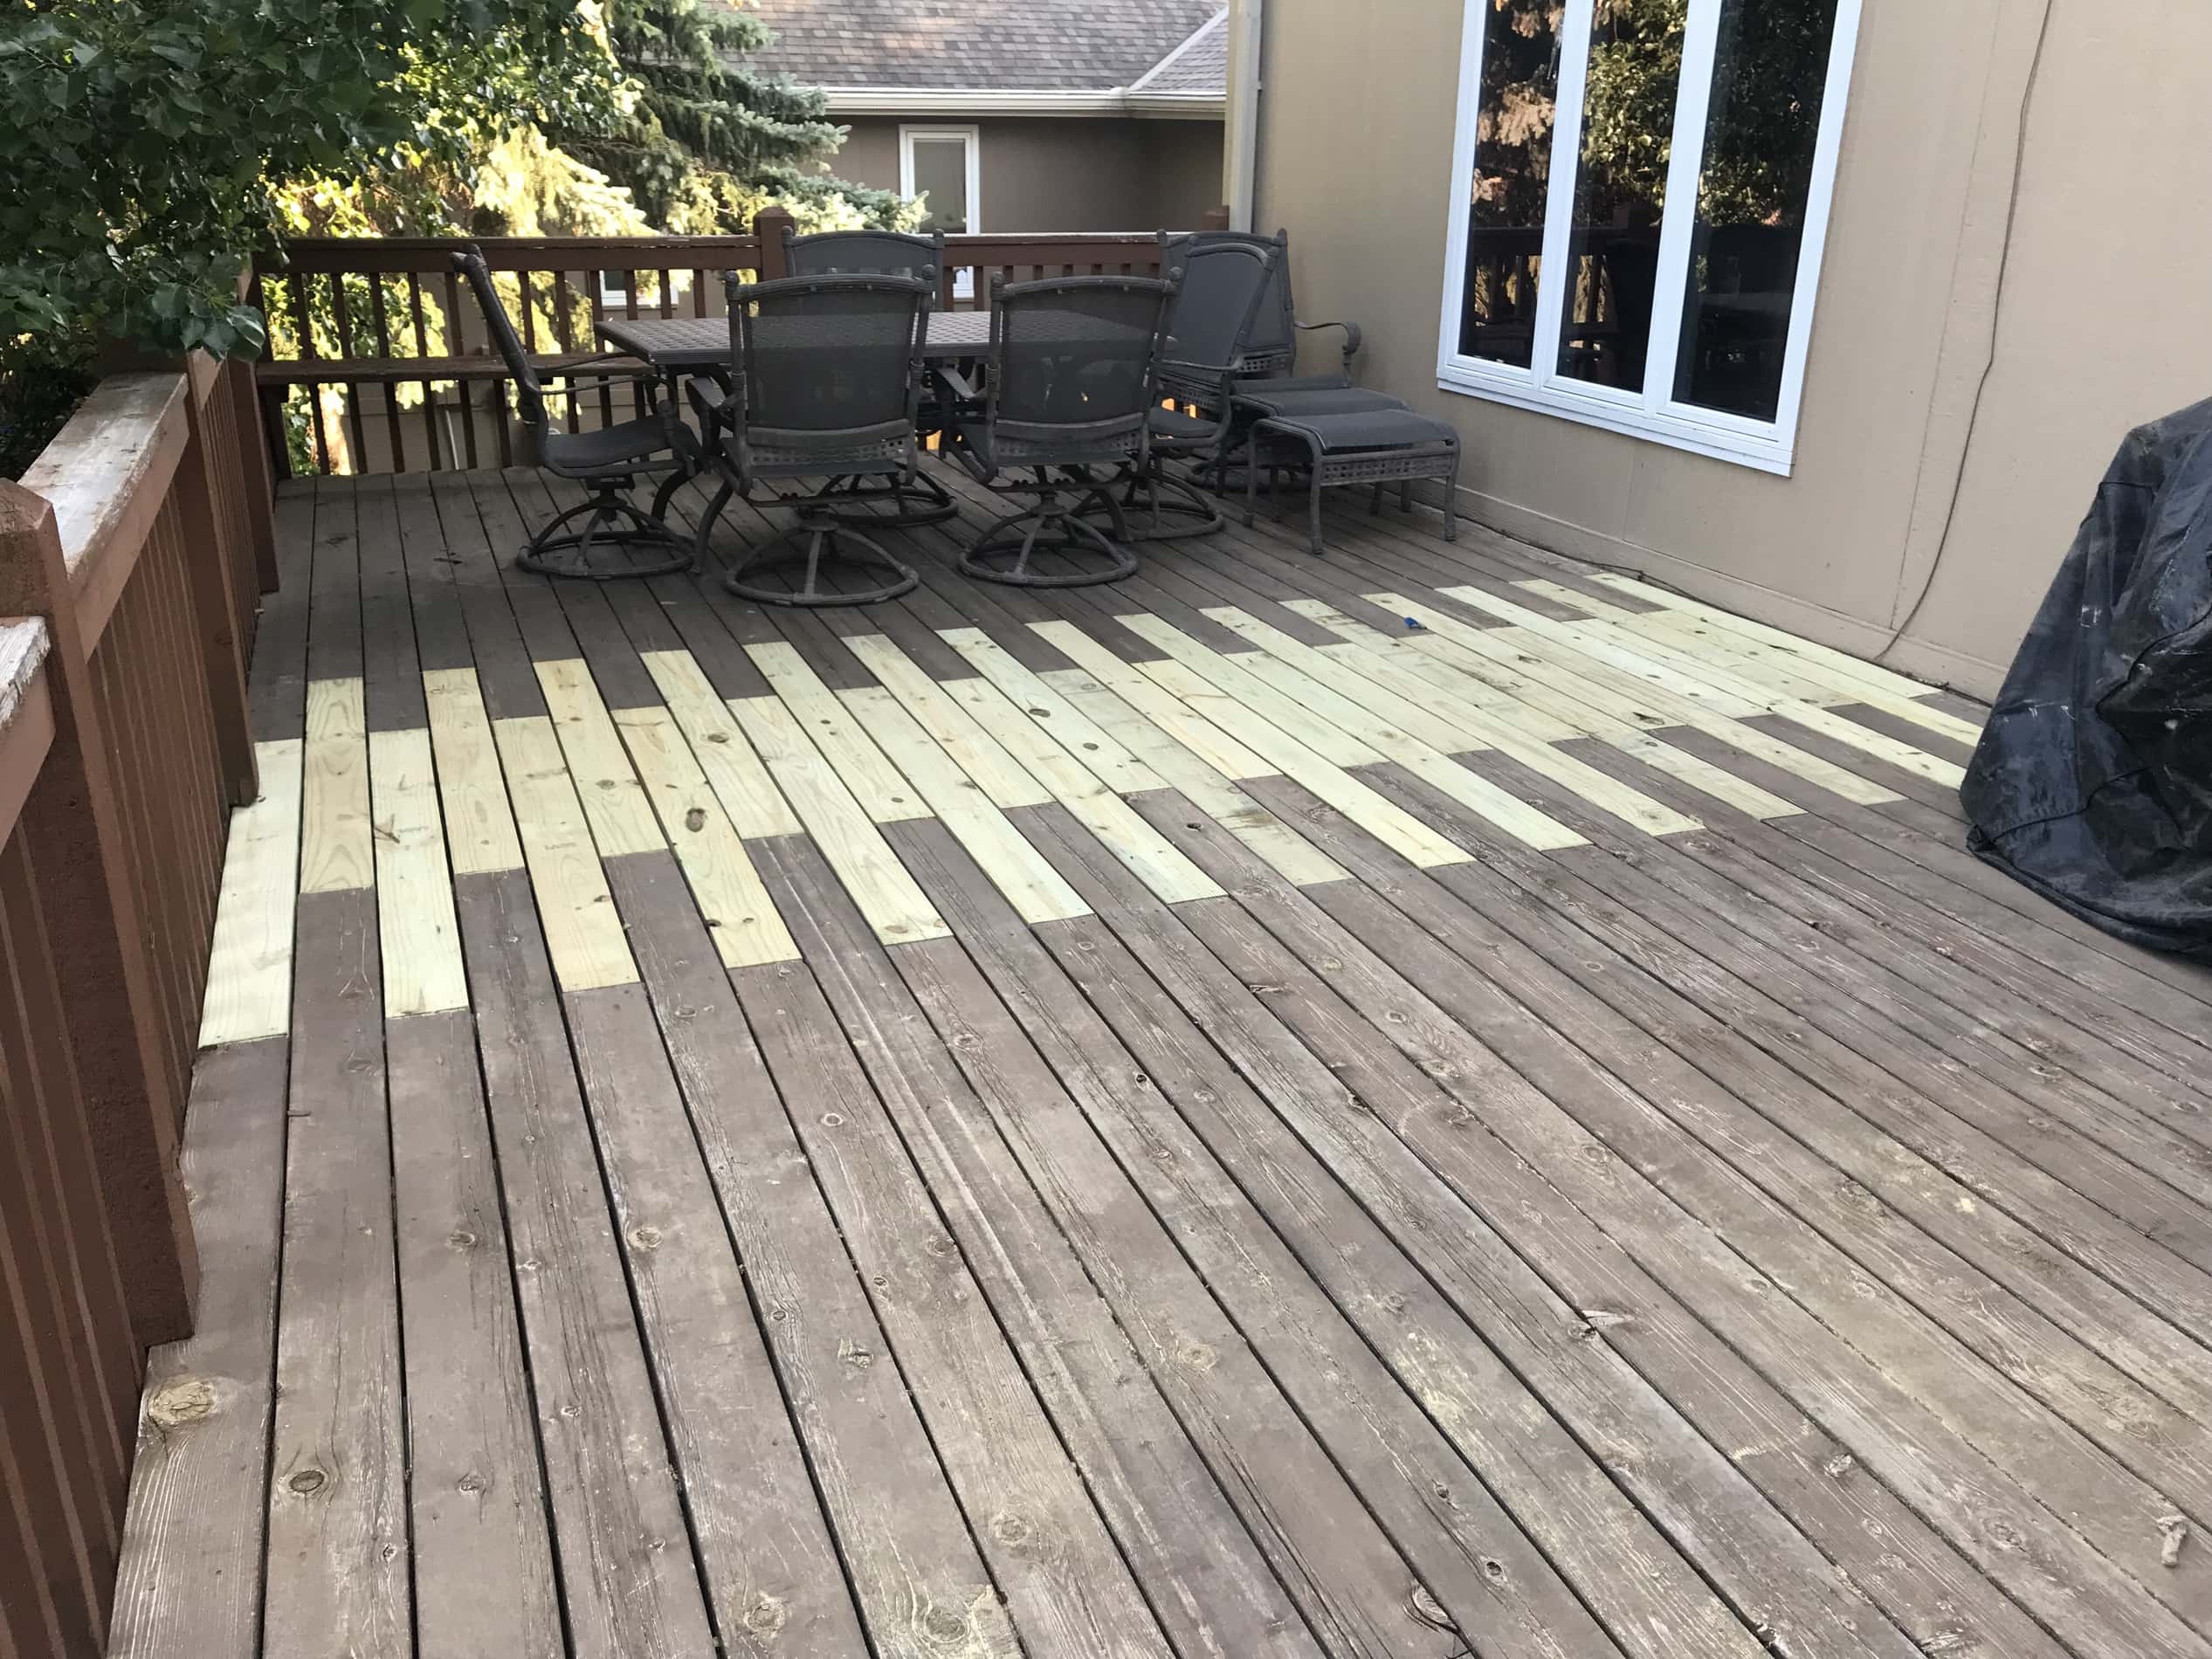 Since deck repair can be done all year round, it's easy to repair decks like this one.